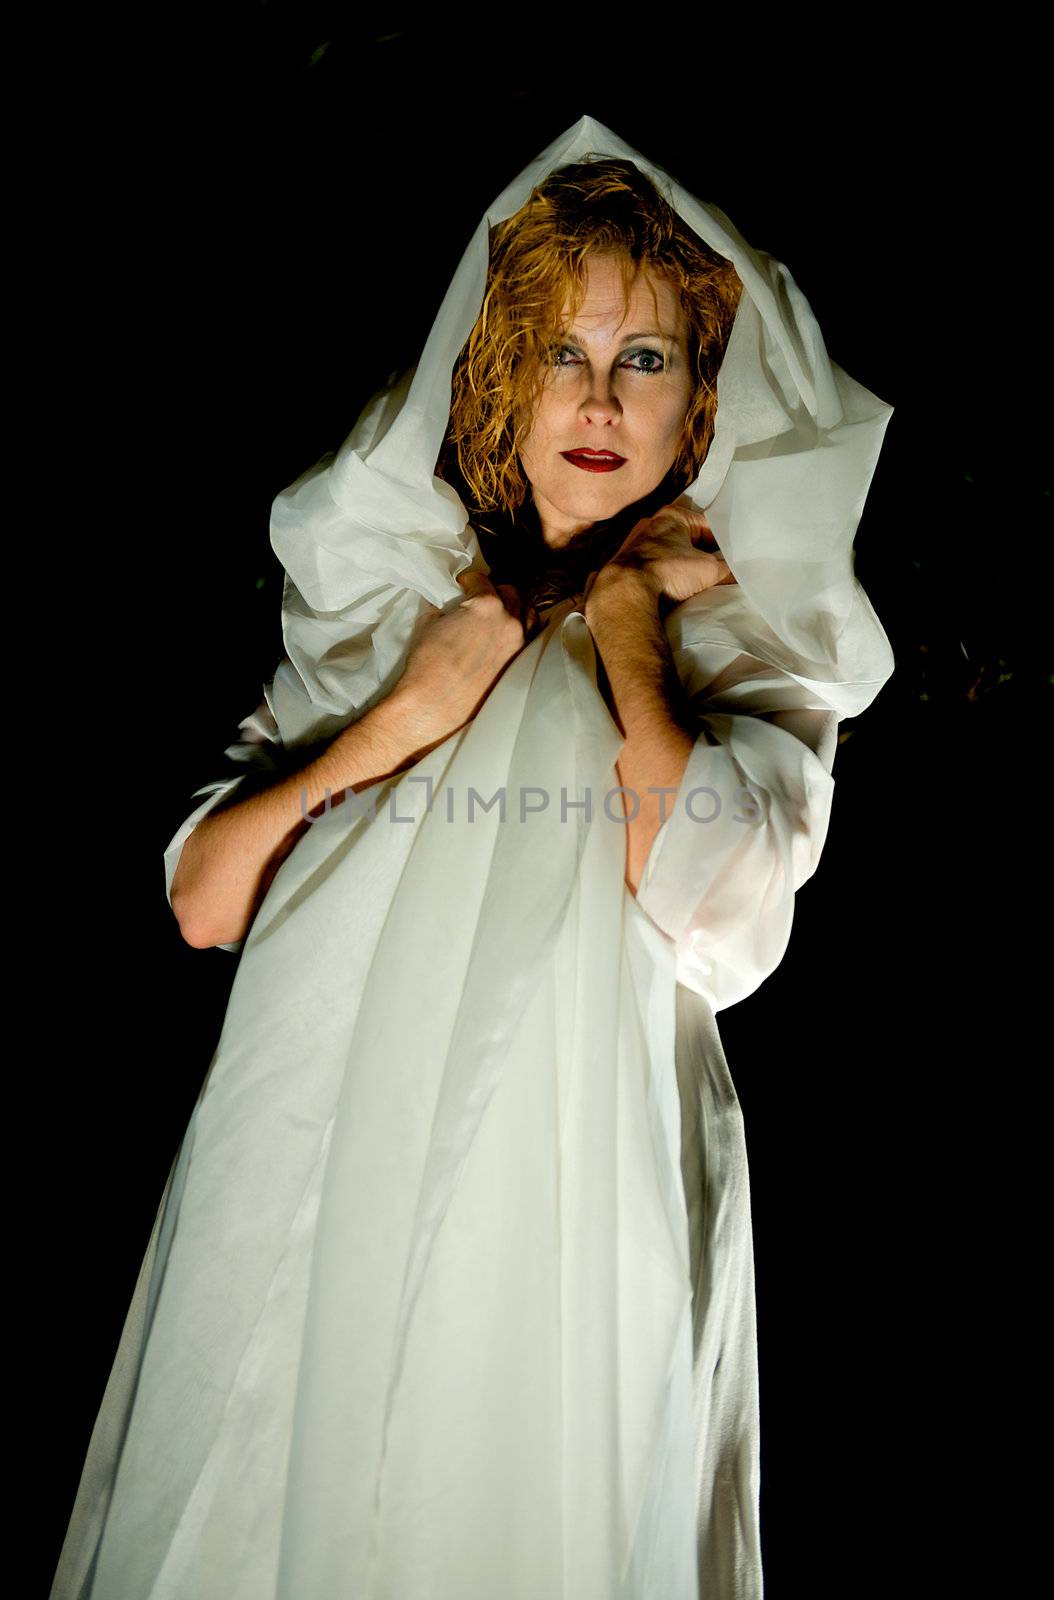 Mysterious image of attractive blonde woman wrapped in white cloth in the dark of night.  Image has a somewhat eerie yet spiritual feel to it.